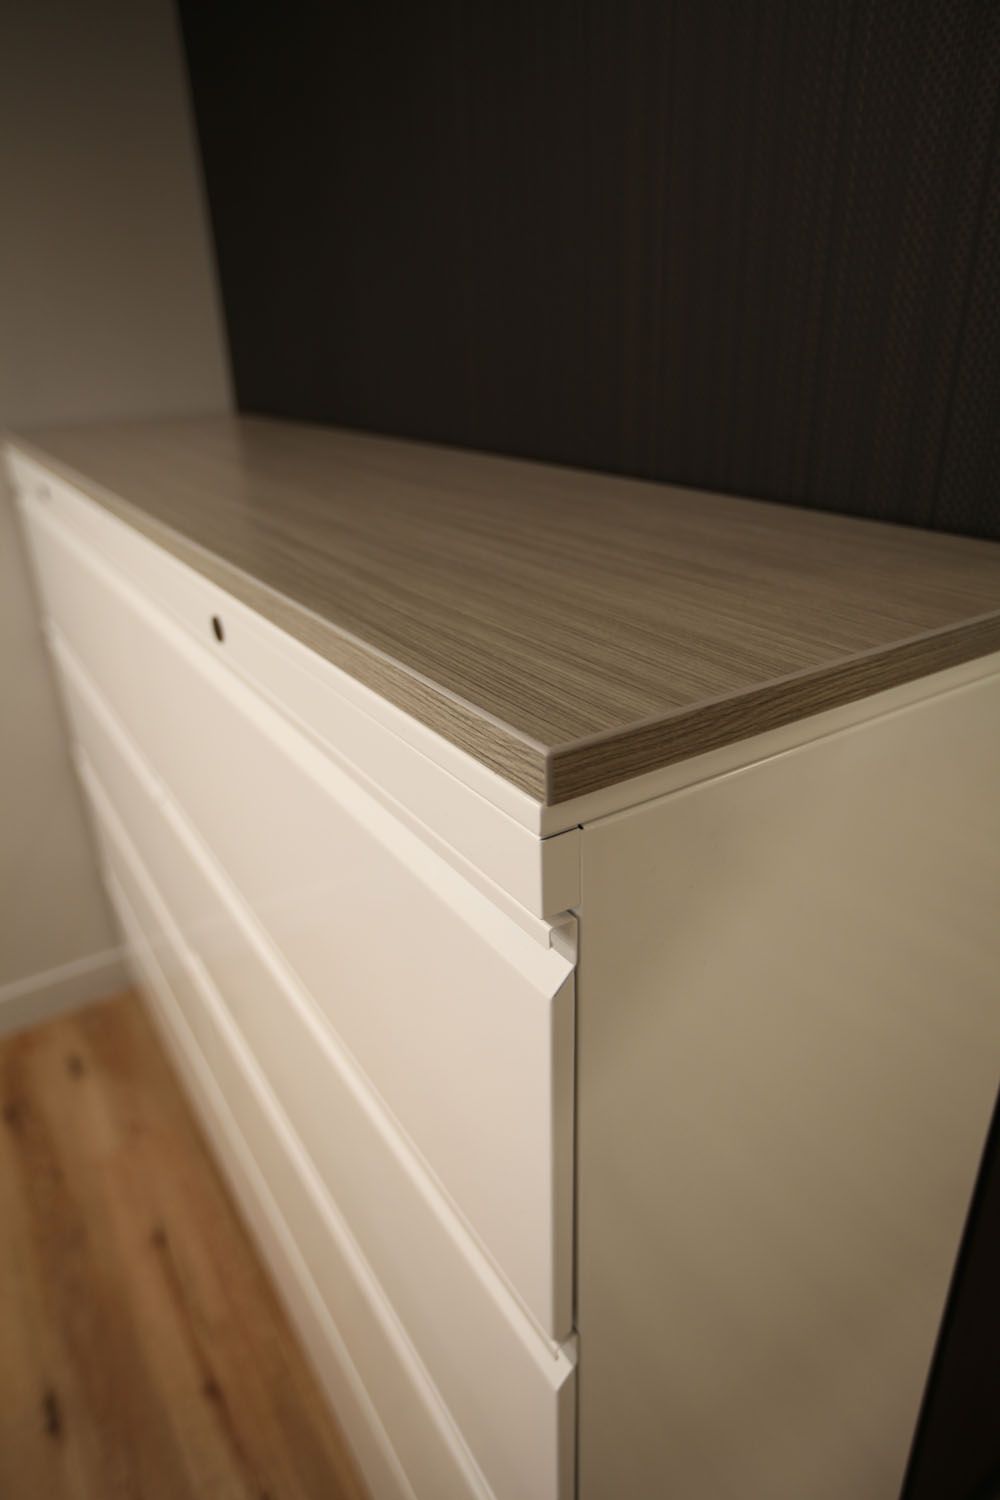 Common Tops are Available in Numerous Laminate Finishes